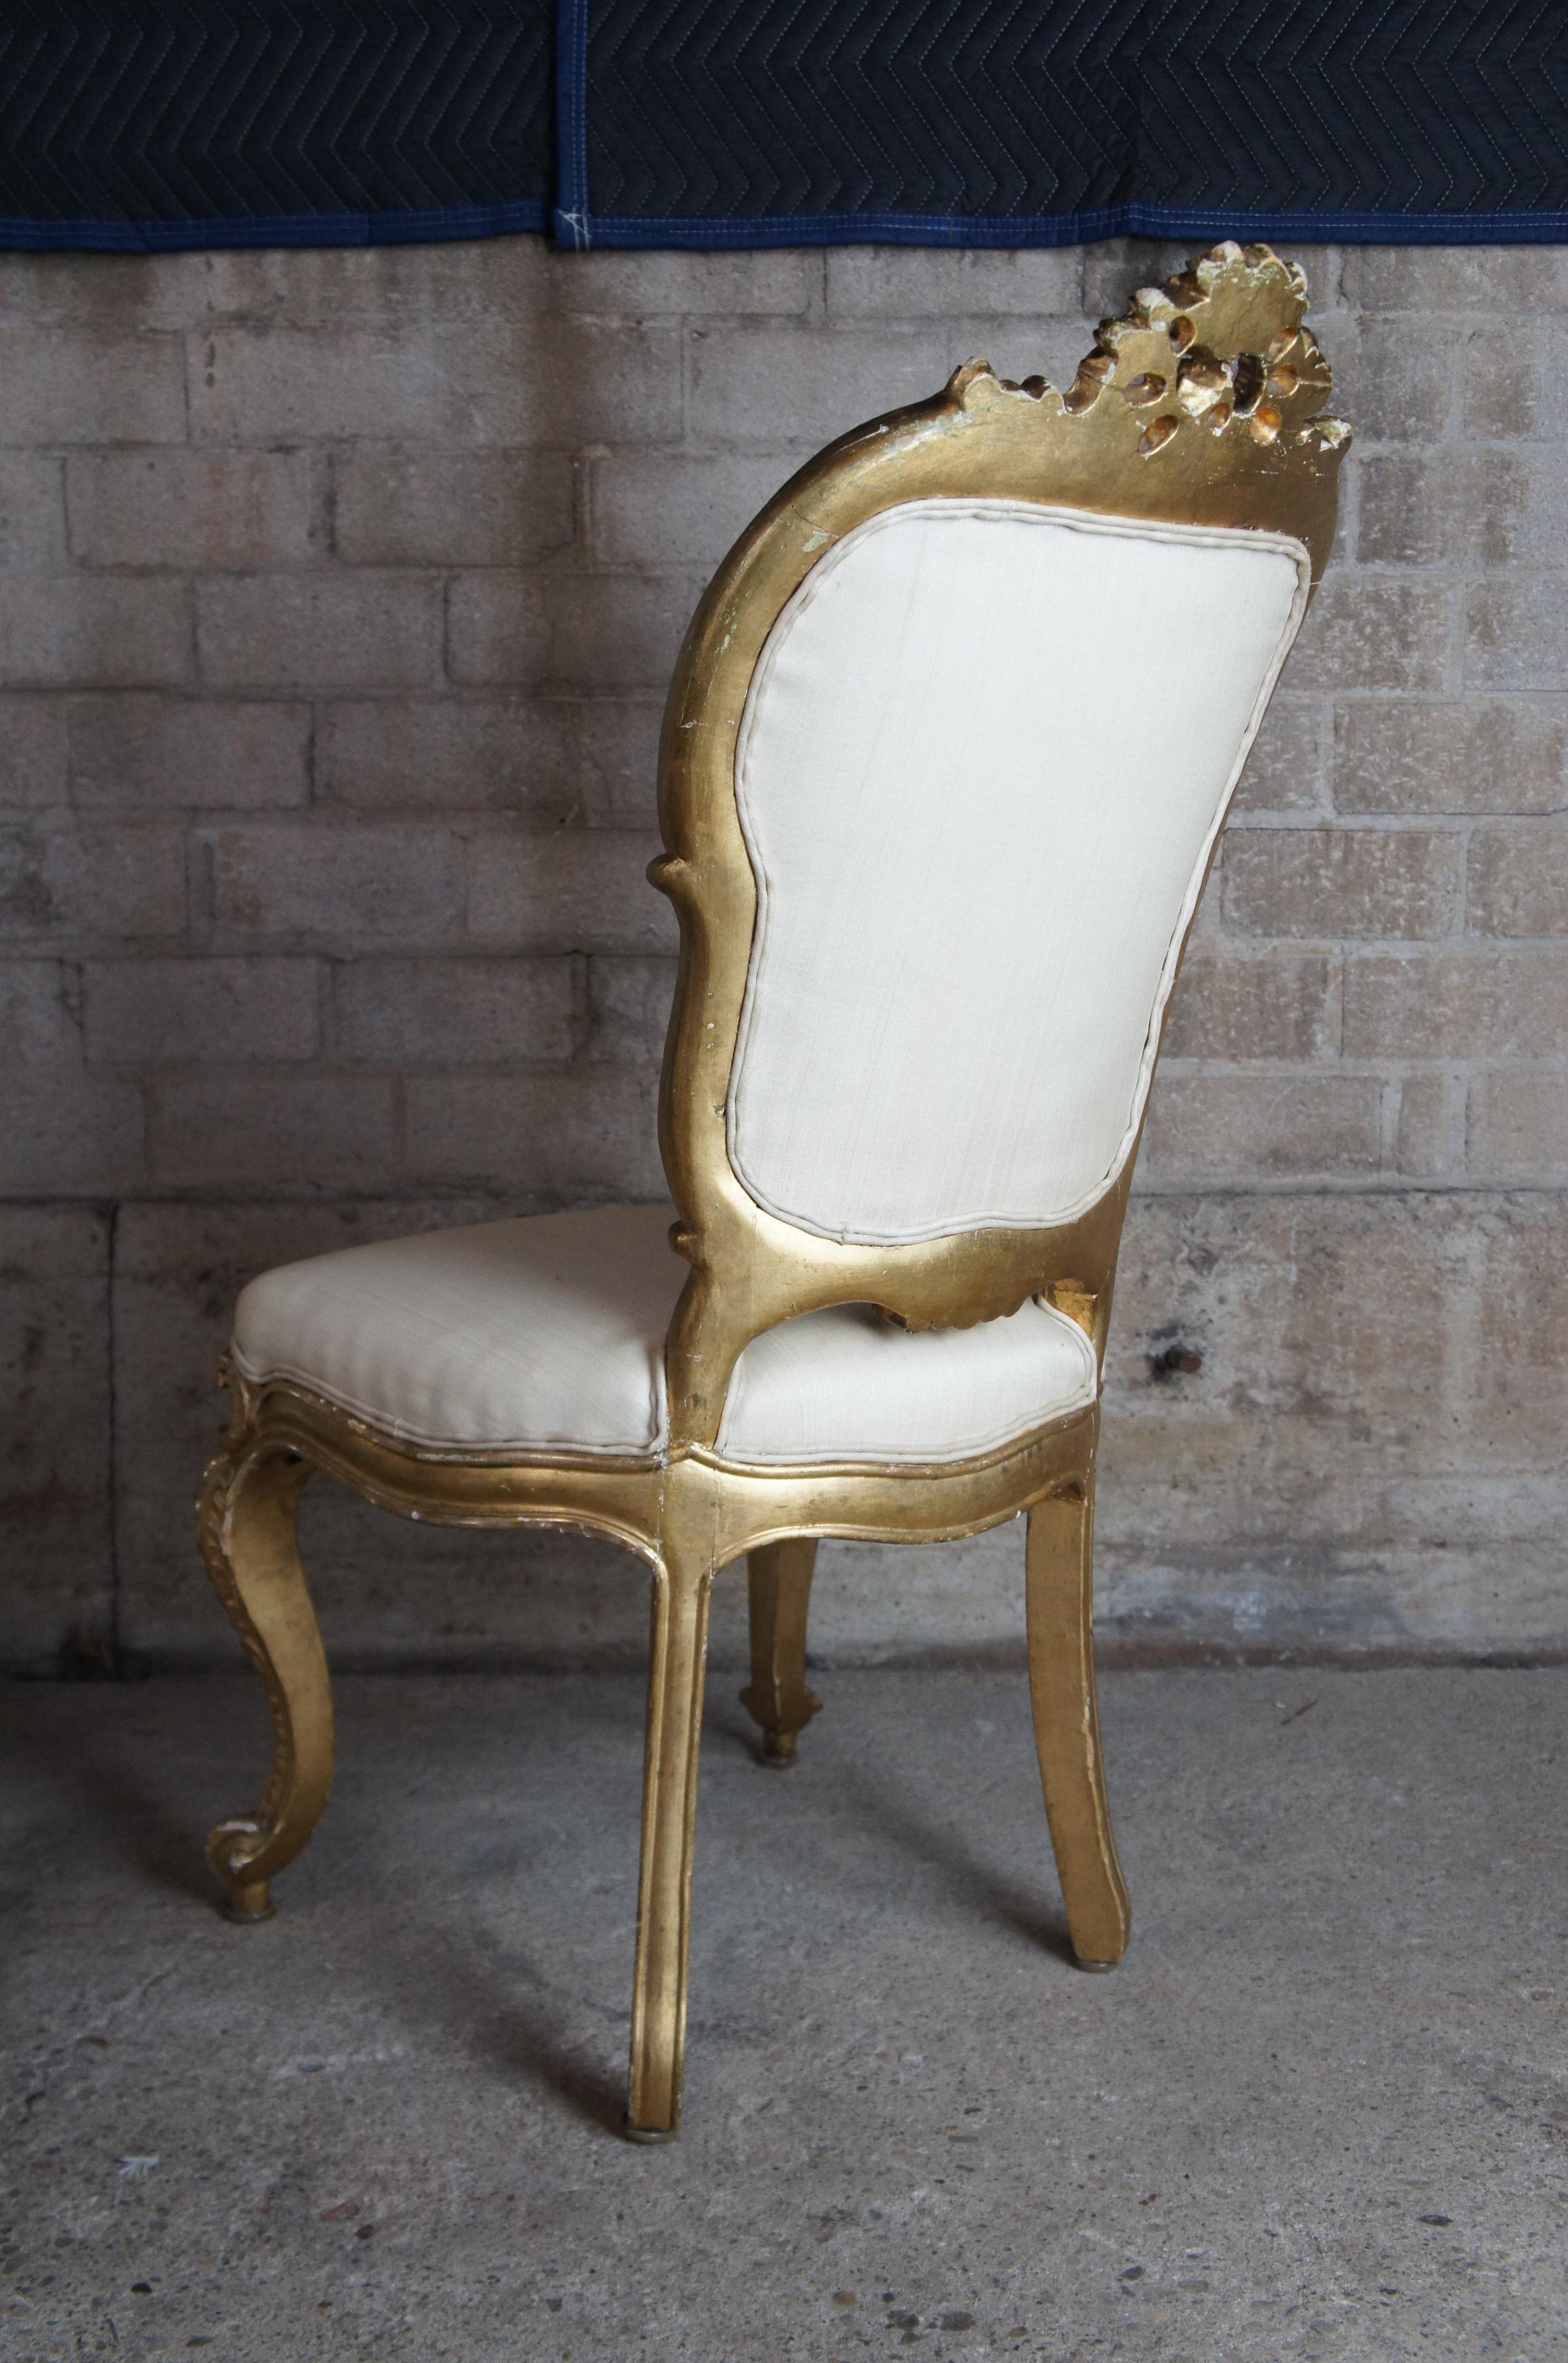 Silk 8 Antique Swedish 18th Century Baroque French Louis XV Rococo Gilt Dining Chairs For Sale